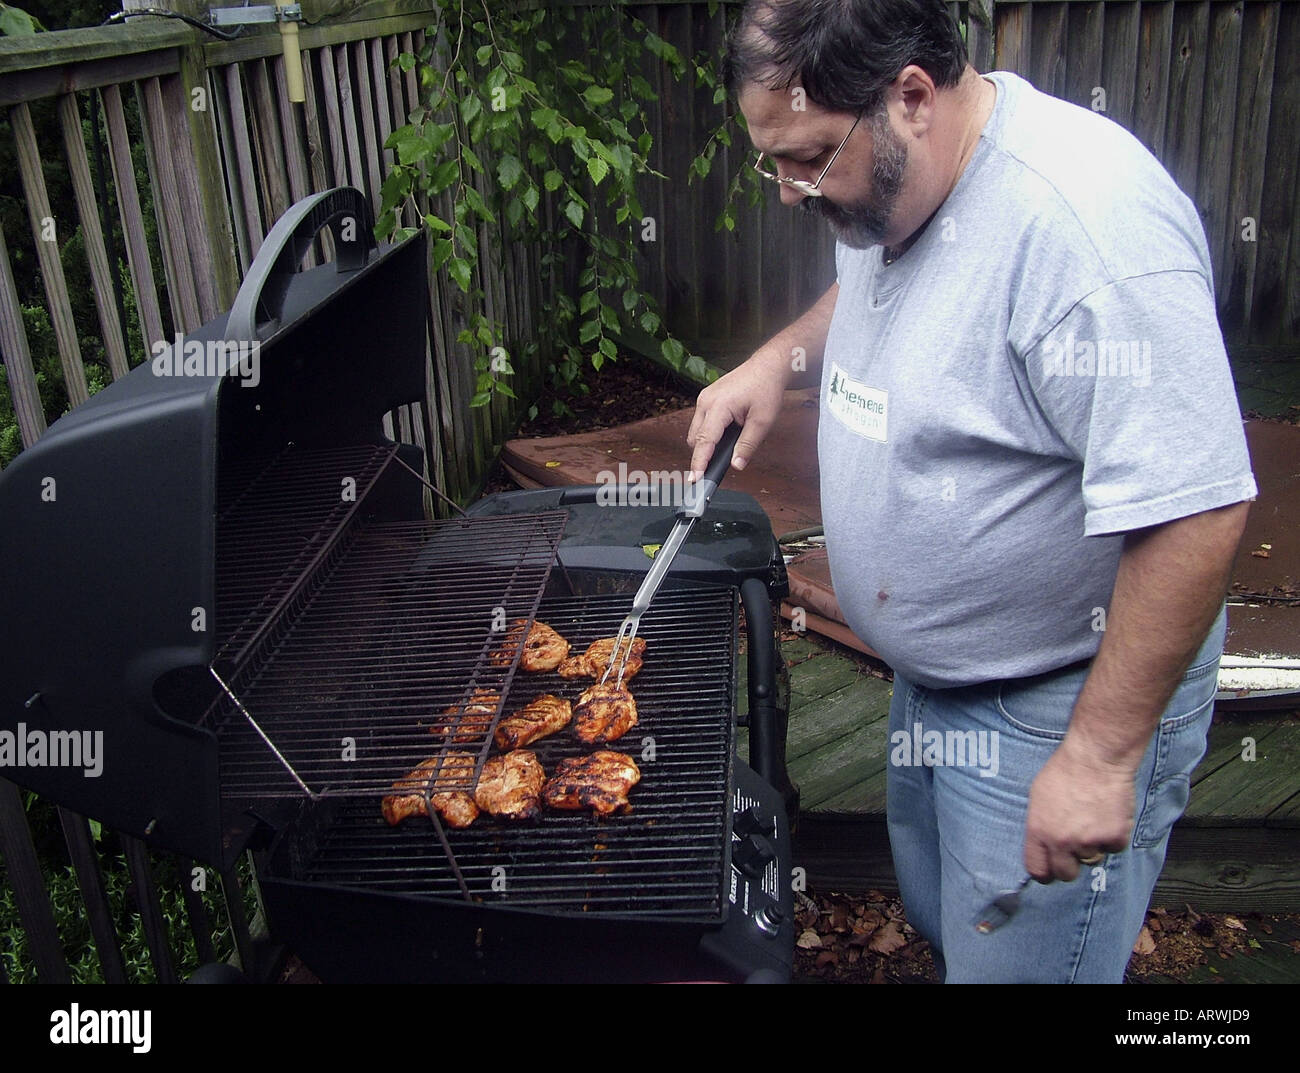 man grilling chicken on barbeque grill Stock Photo - Alamy